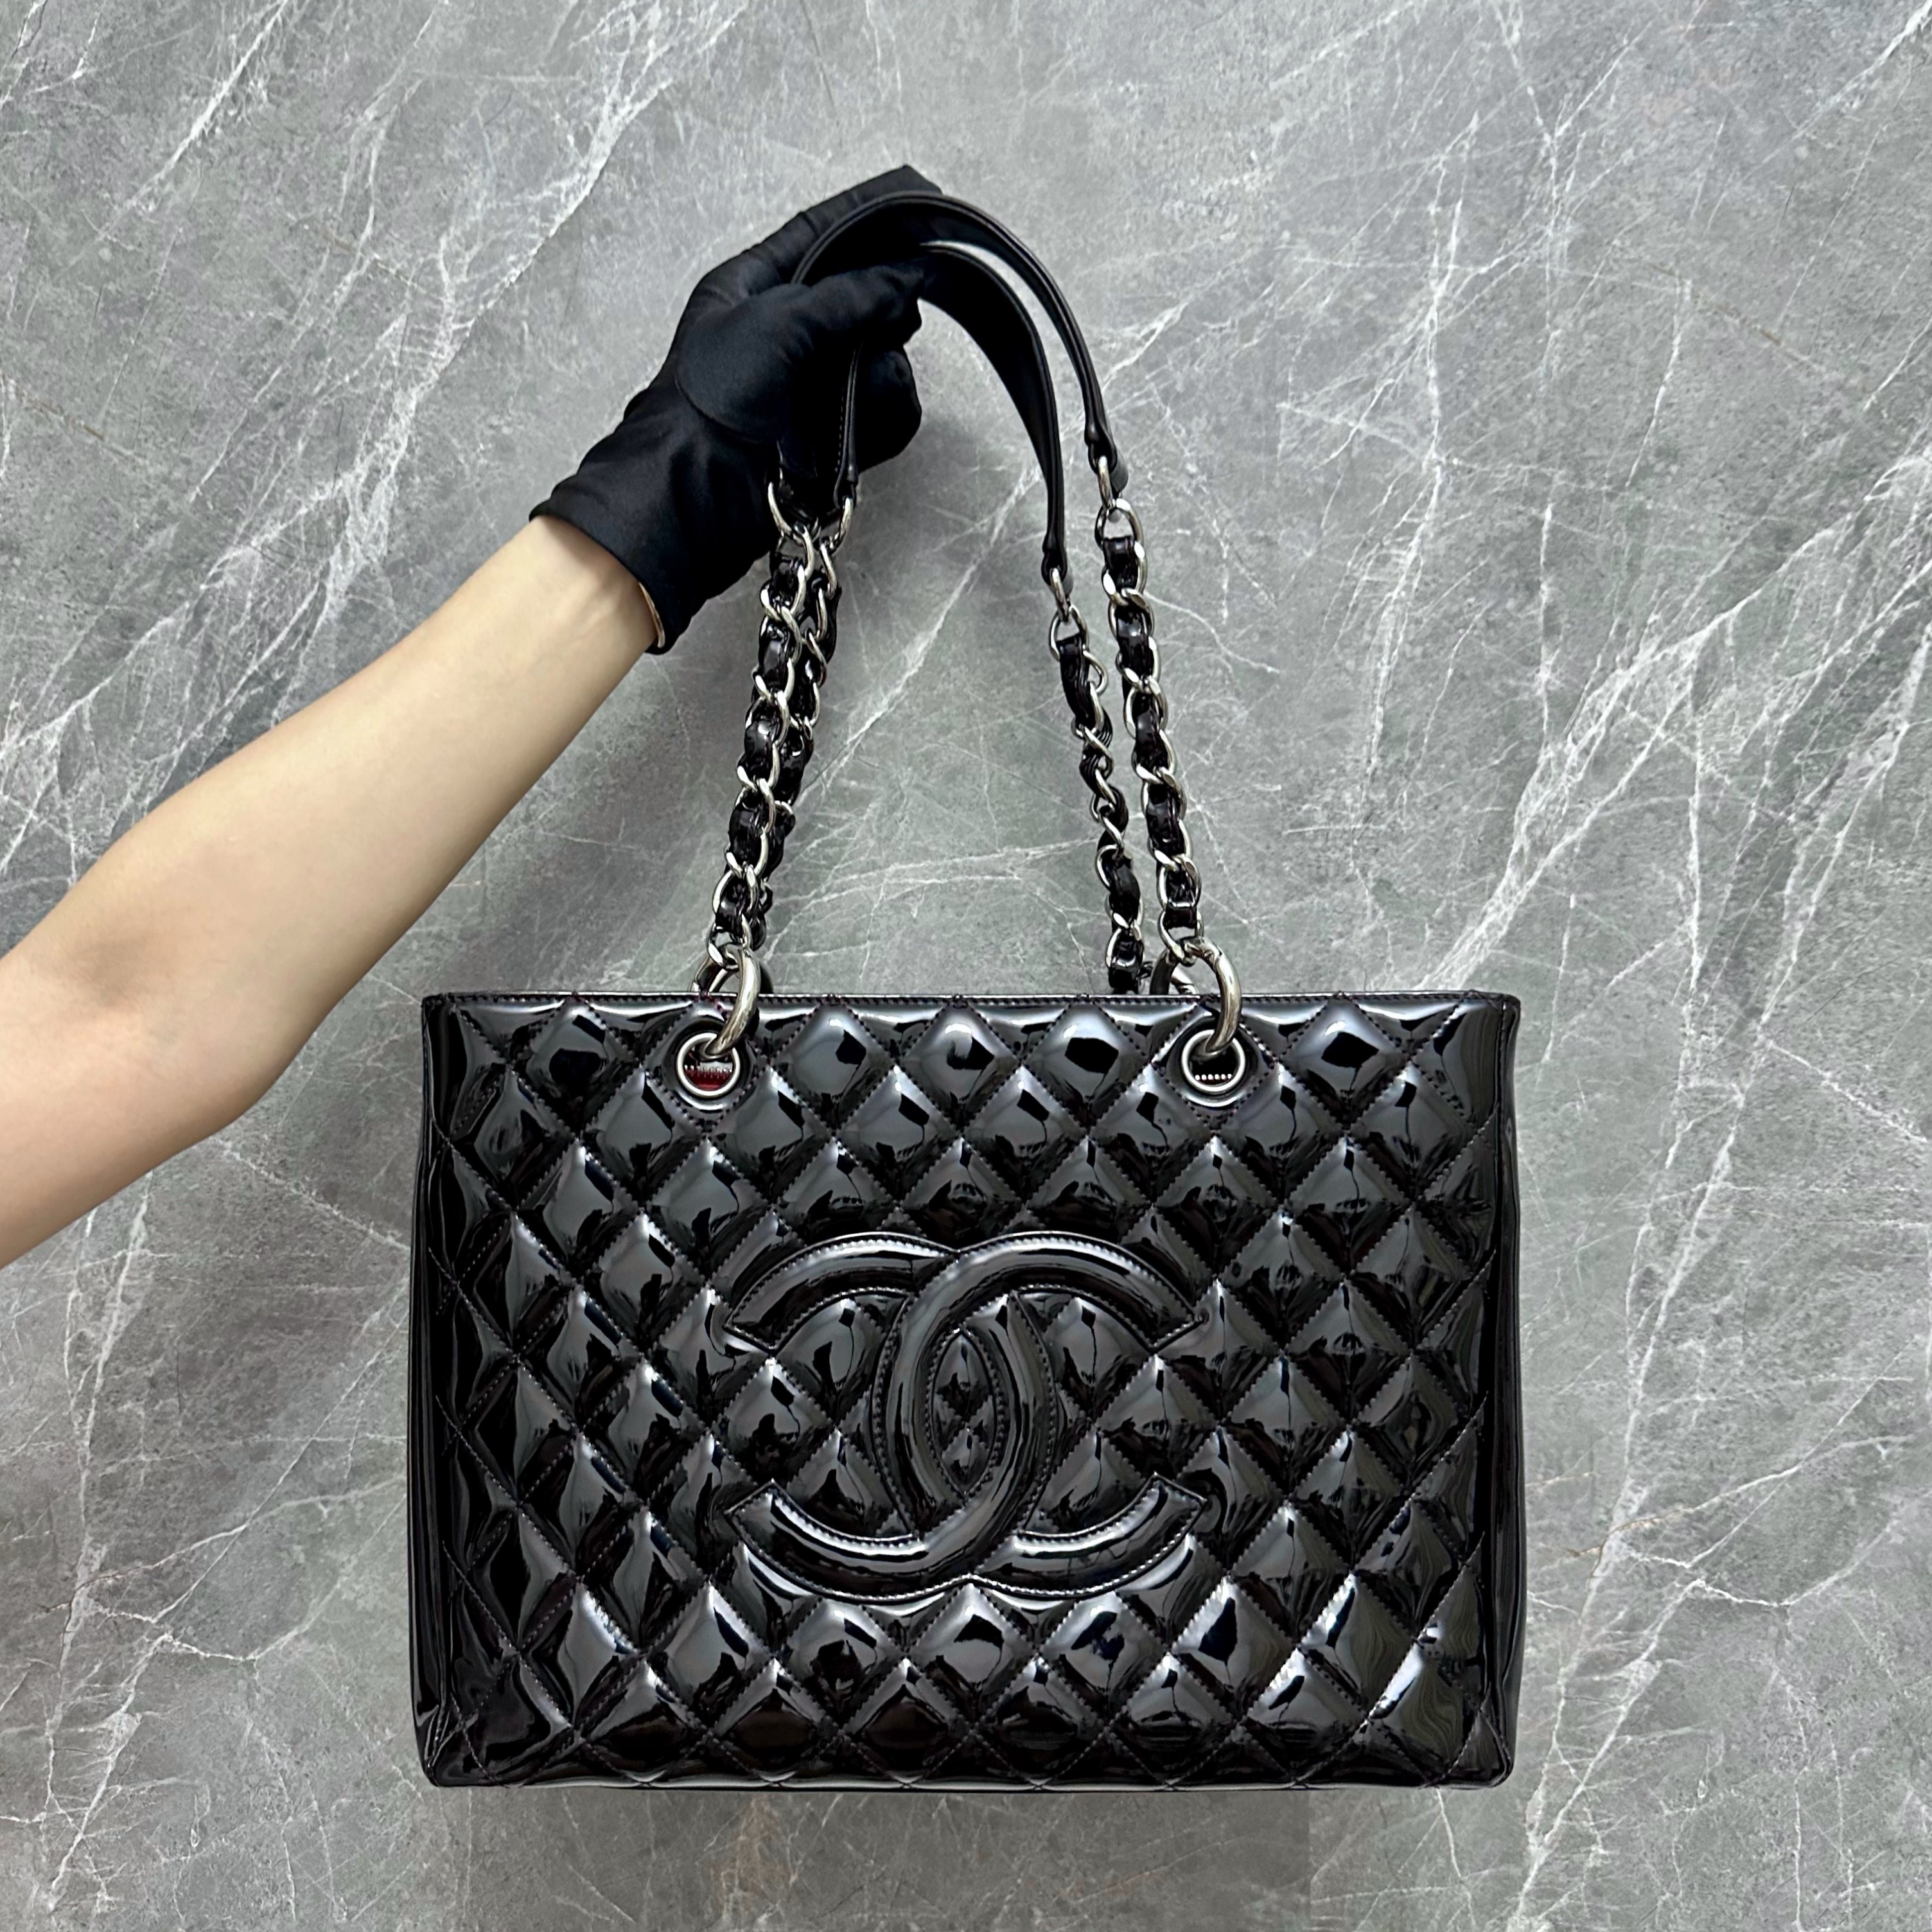 *Recolor* Chanel GST Grand Shopping Tote Patent Leather Black